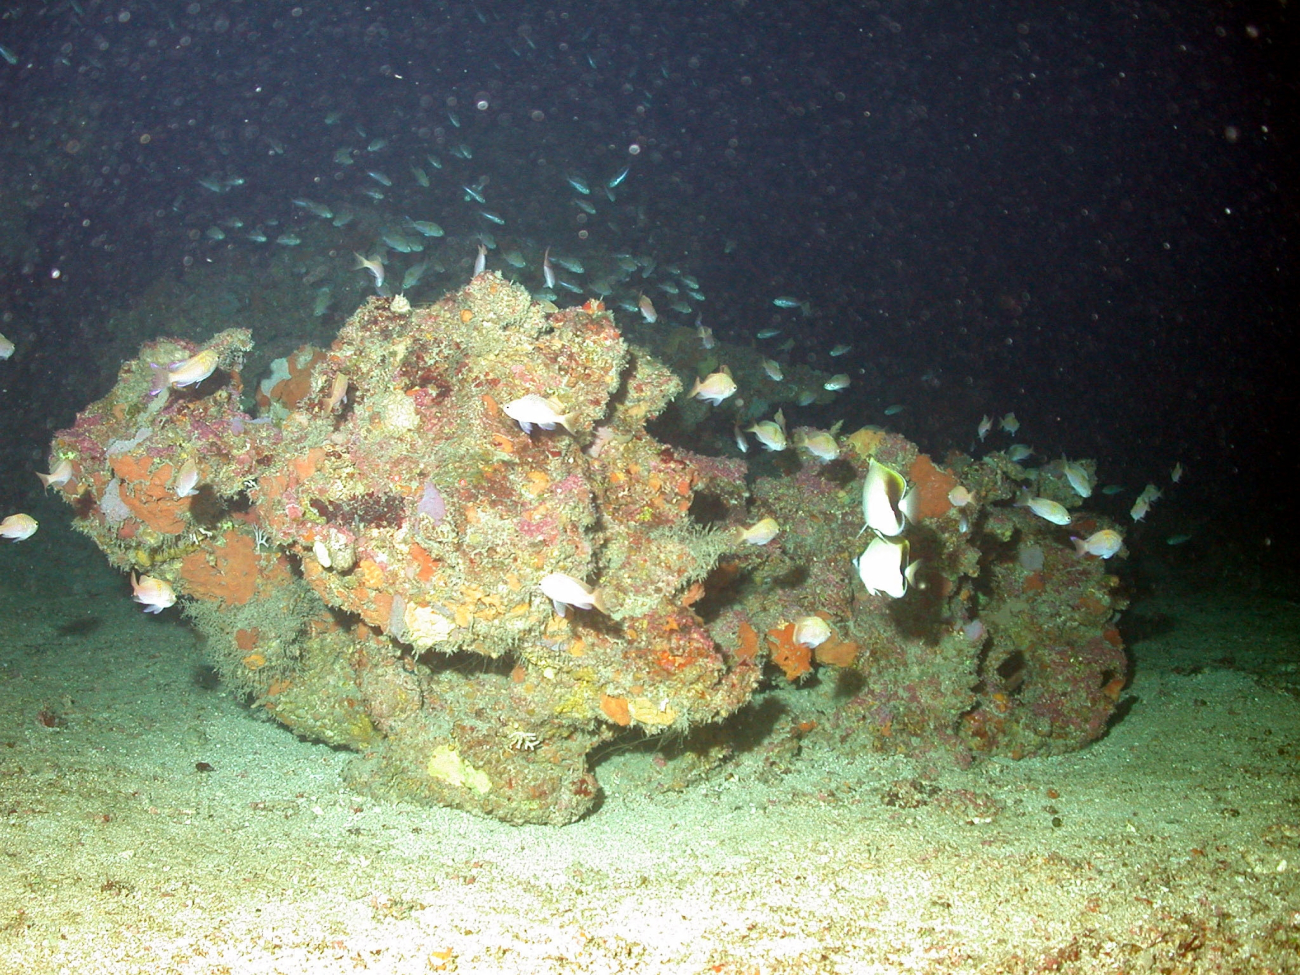 A boulder serving as habitat for numerous fish and types of sessile life